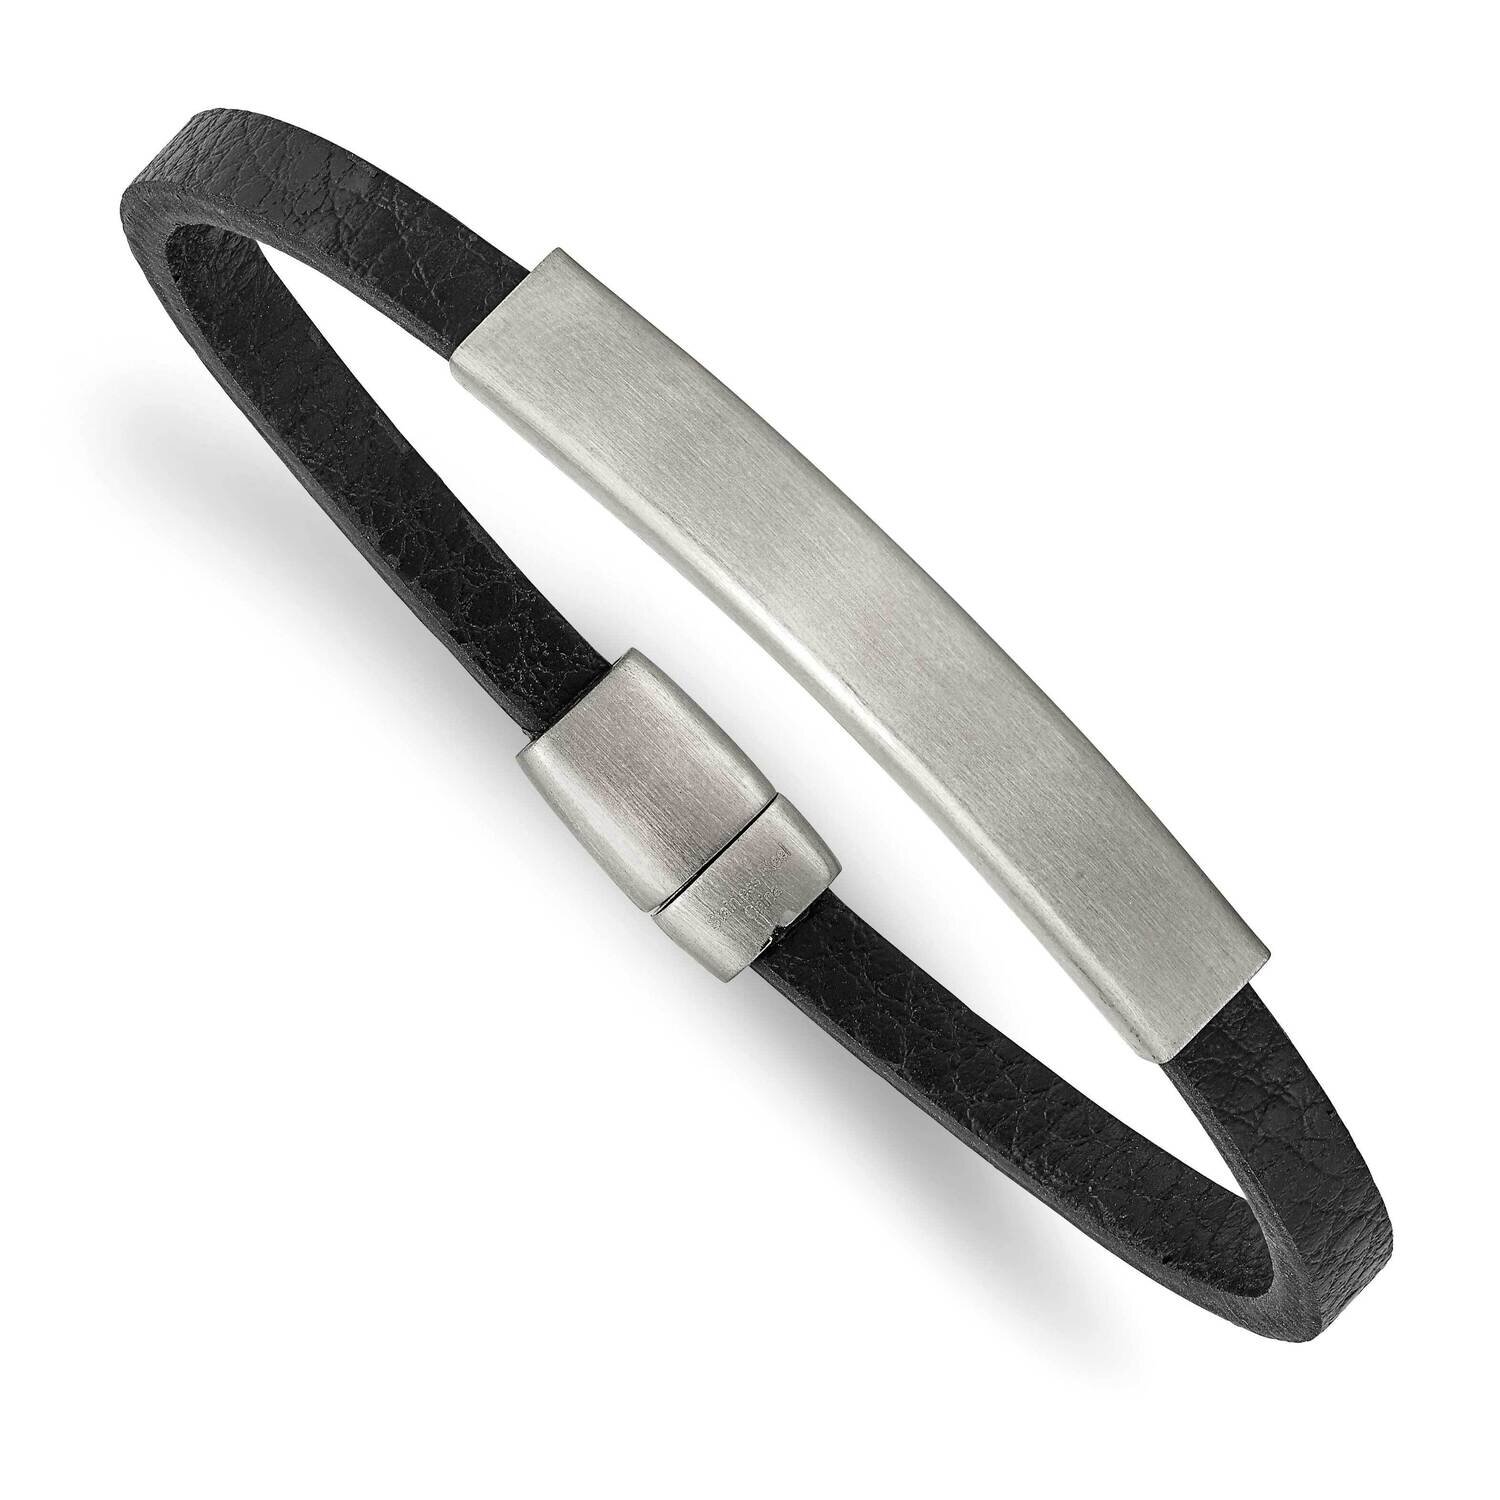 Textured Black Pu Leather 8.25 Inch Id Bracelet Stainless Steel Brushed SRB2715-8.25